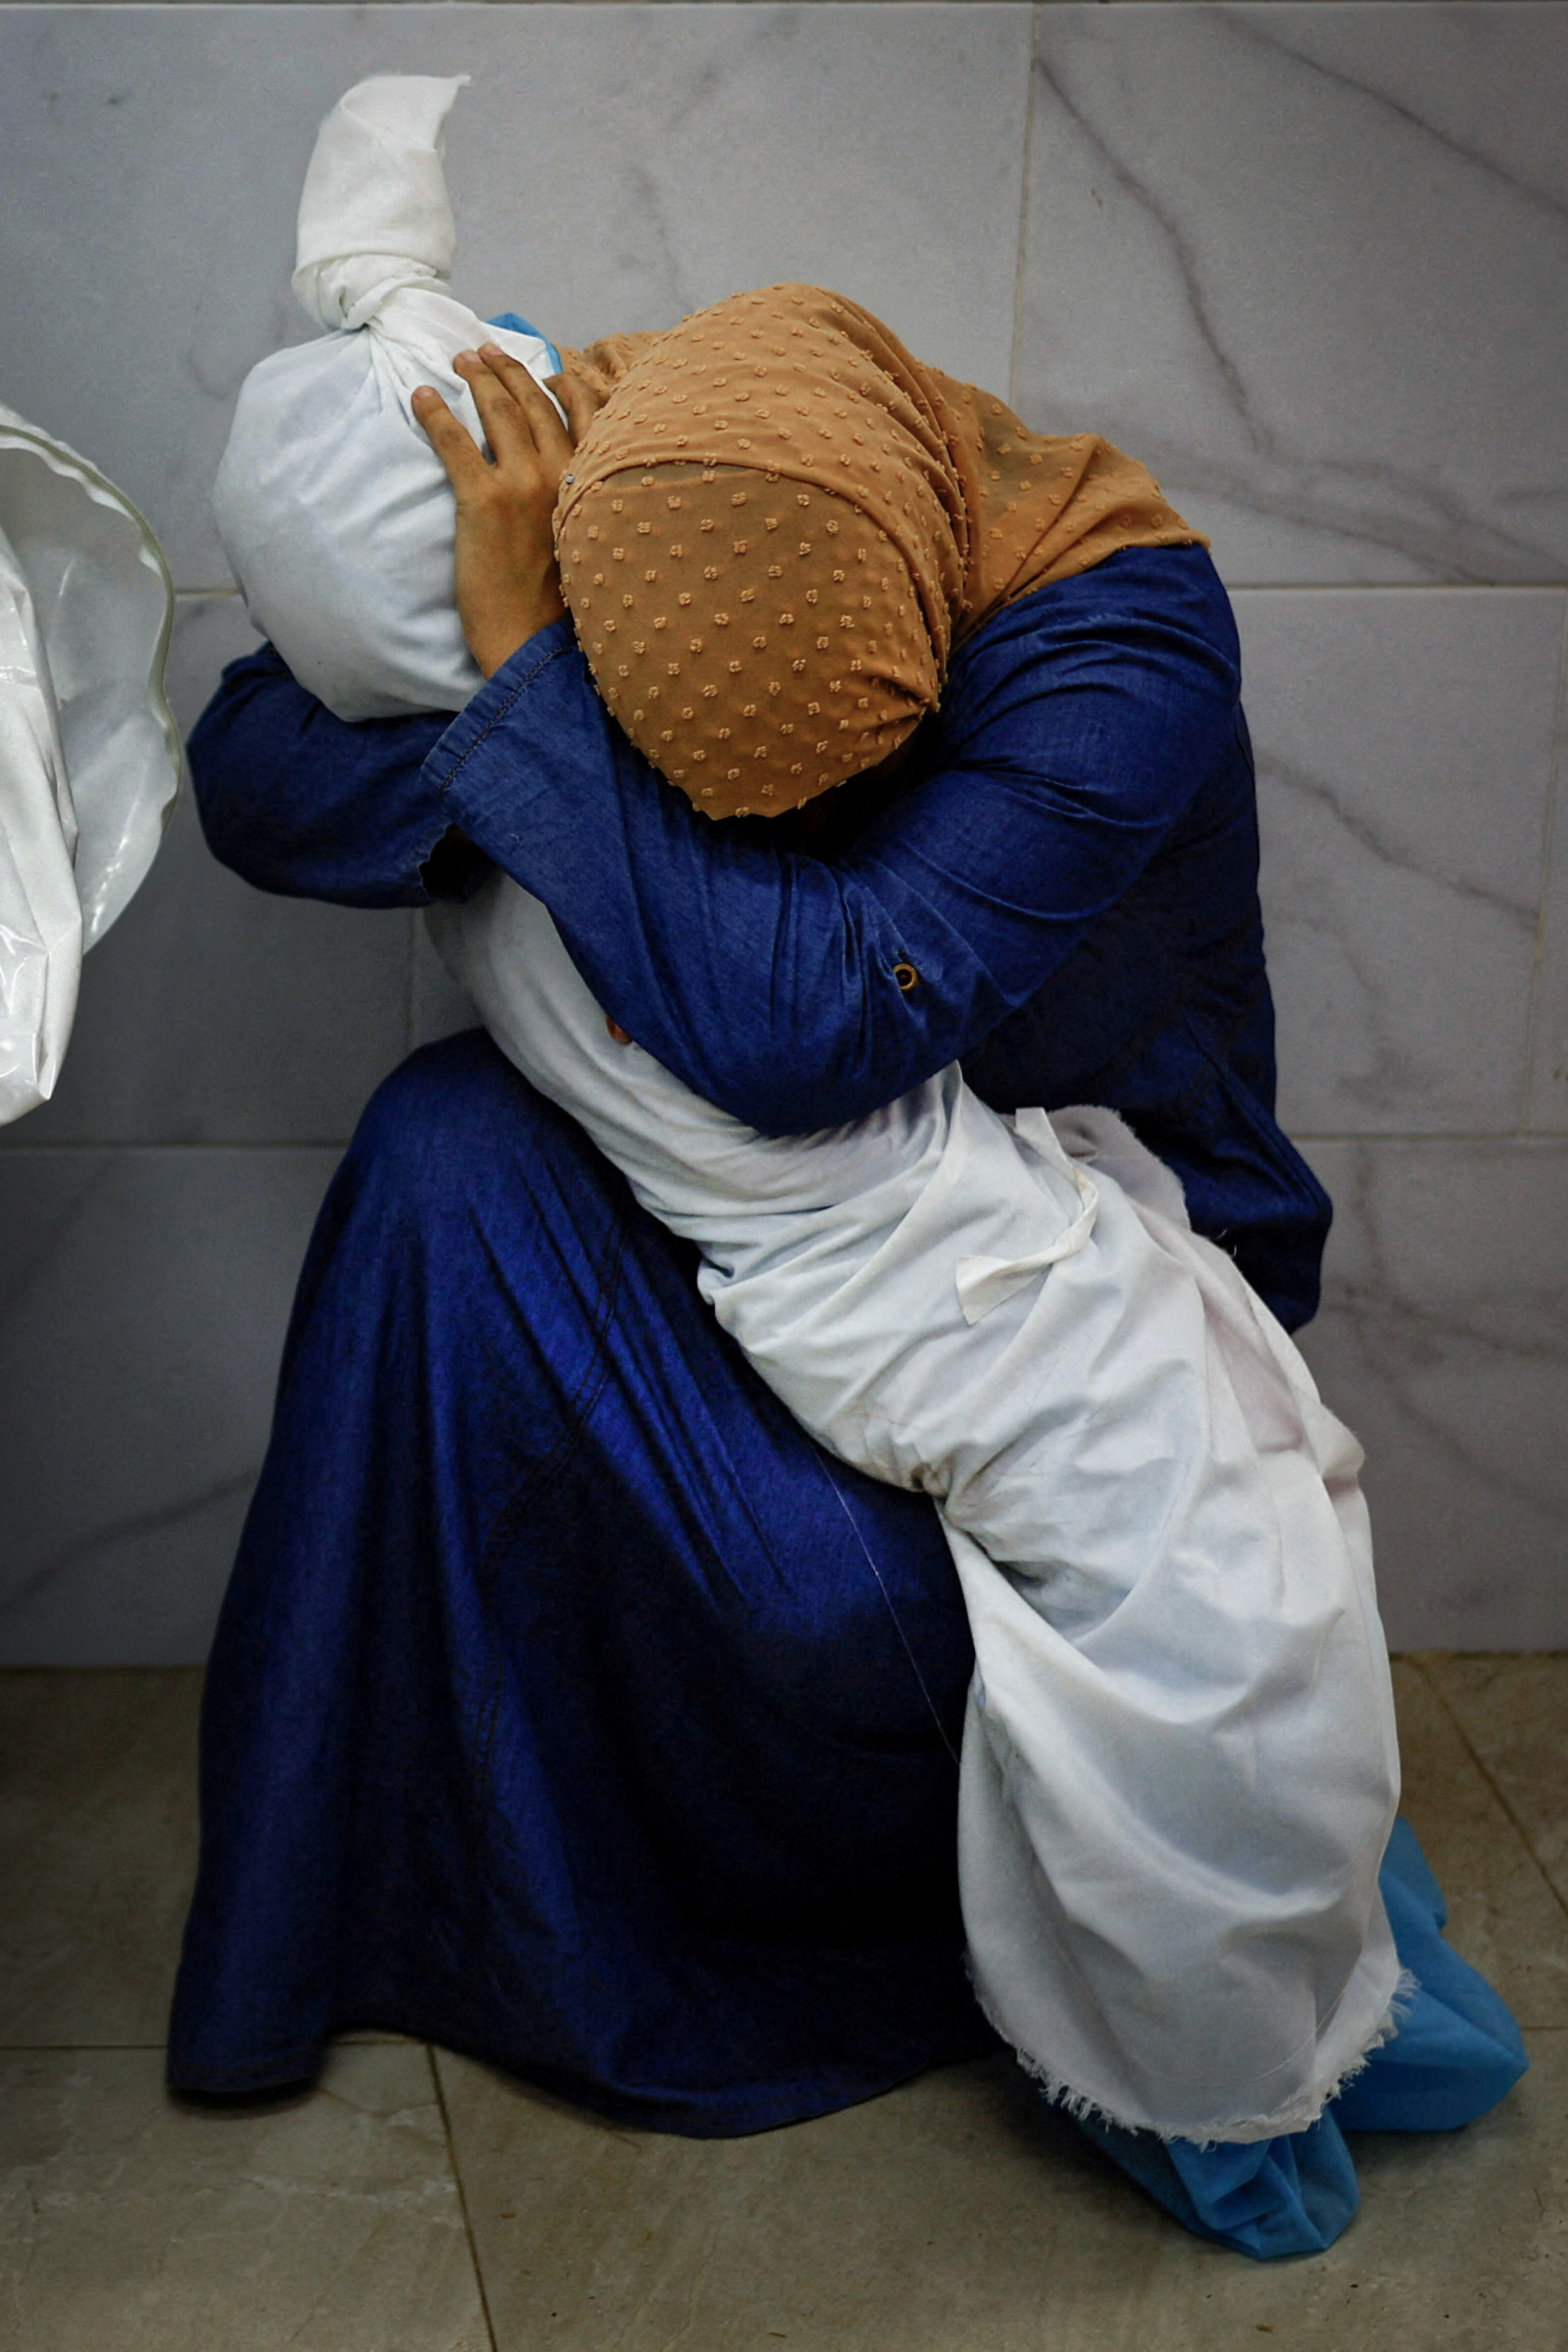 A woman wearing a blue cloak and yellow headscarf crouched on the crowd, holding the body of a small child wrapped in white